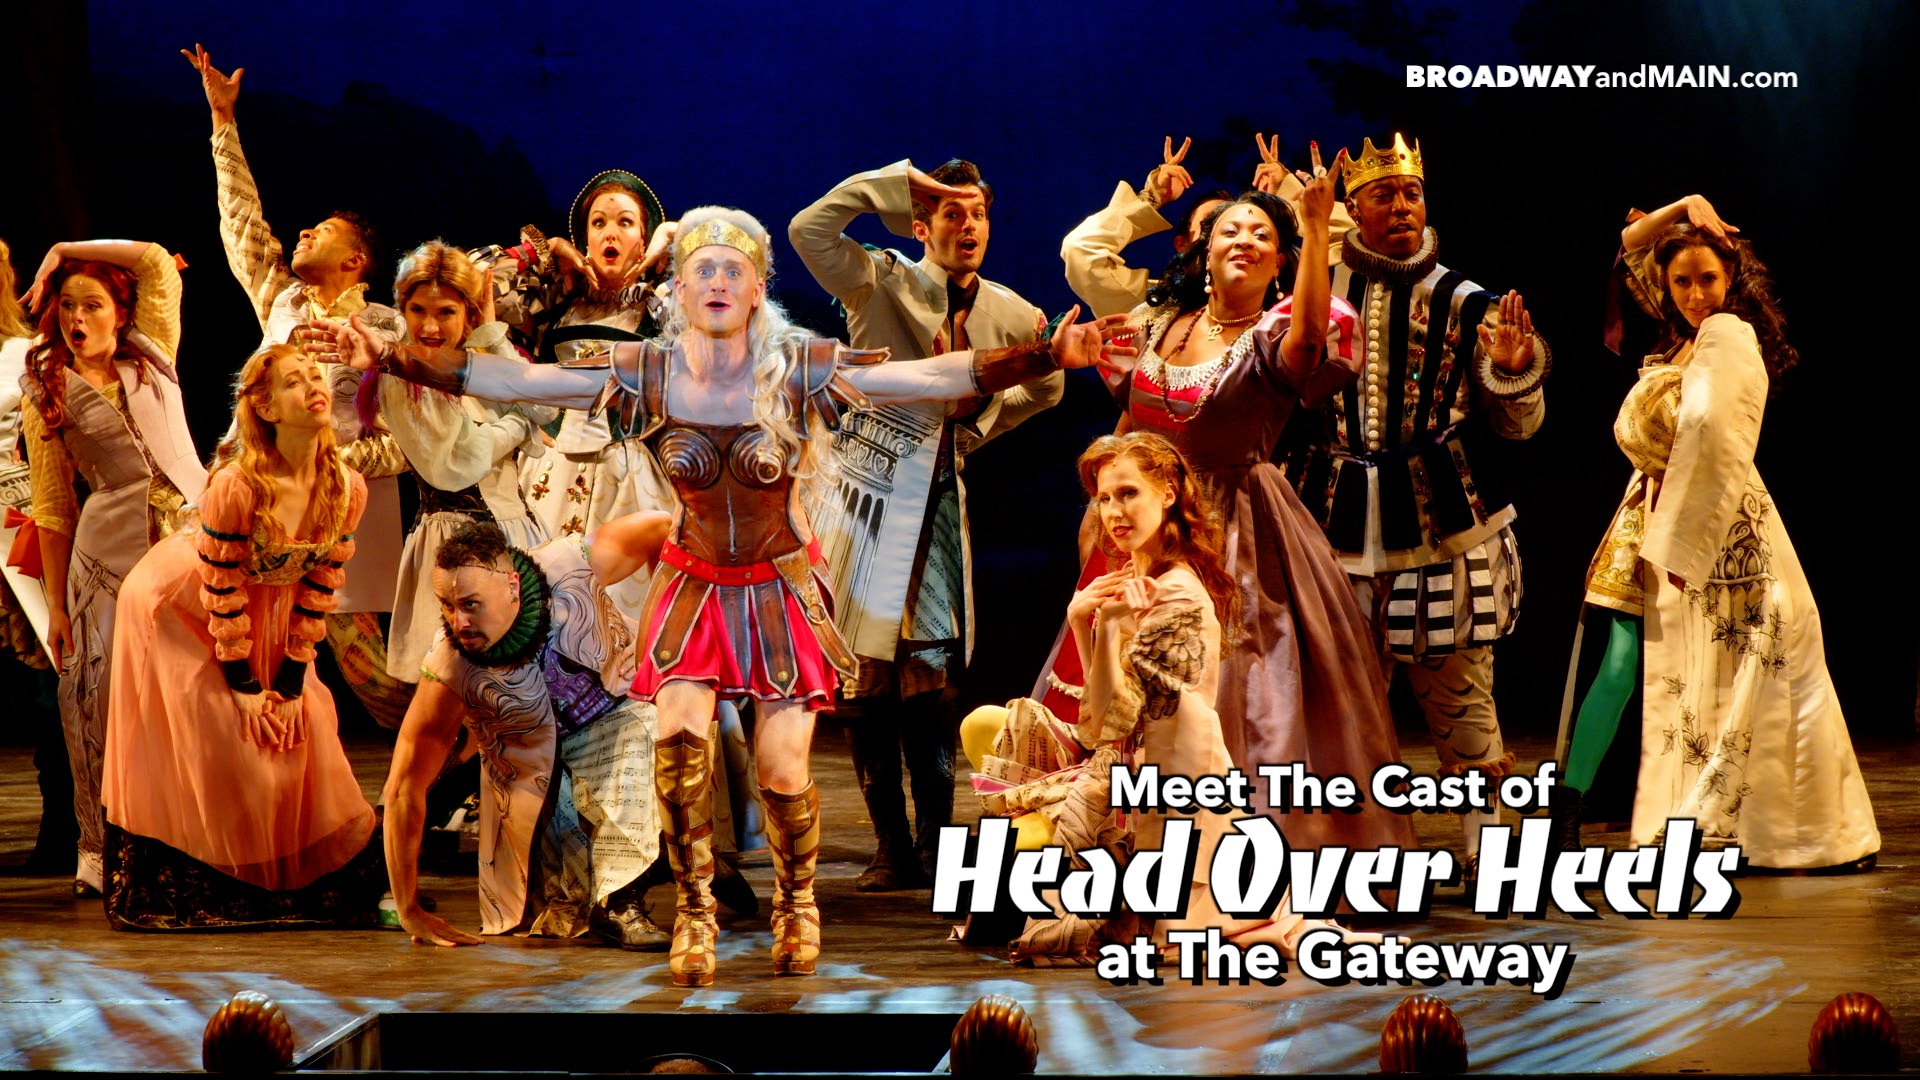 Meet The Cast of Head Over Heels at the Gateway